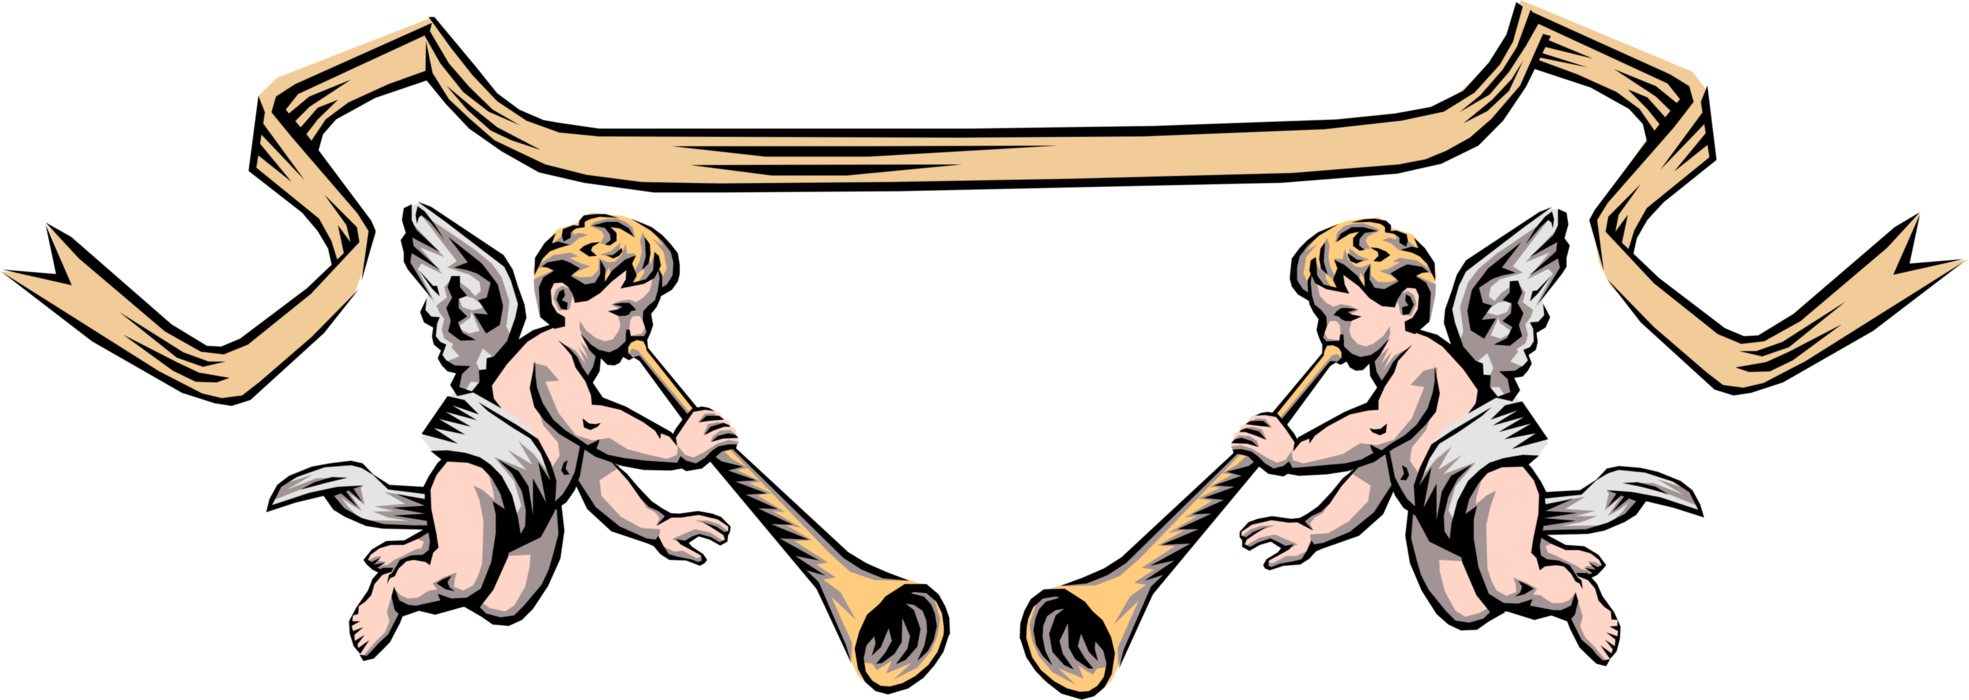 Vector Illustration of Angelic Spiritual Cherub Angels with Wings Blow Trumpet Horns